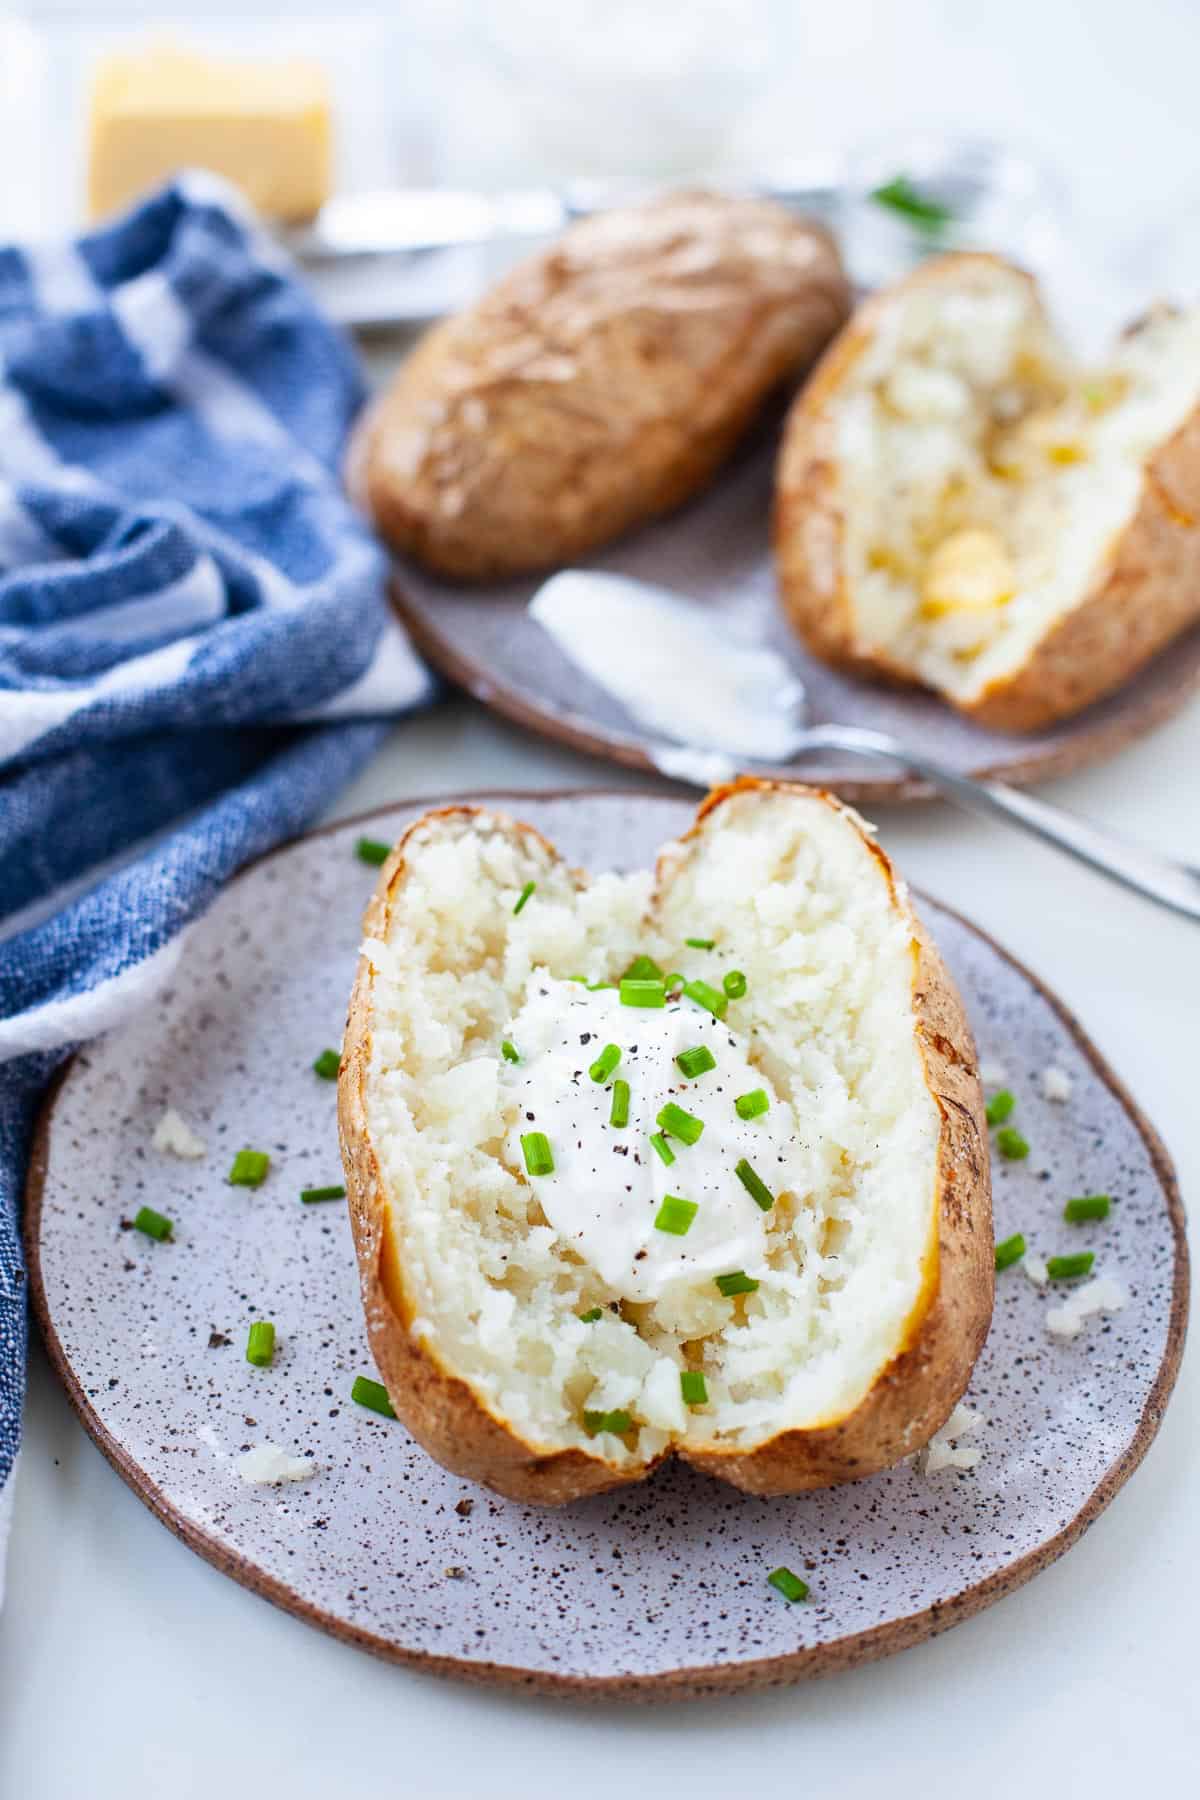 baked potato that's sliced in half with sour cream and two baked potatoes on another plate